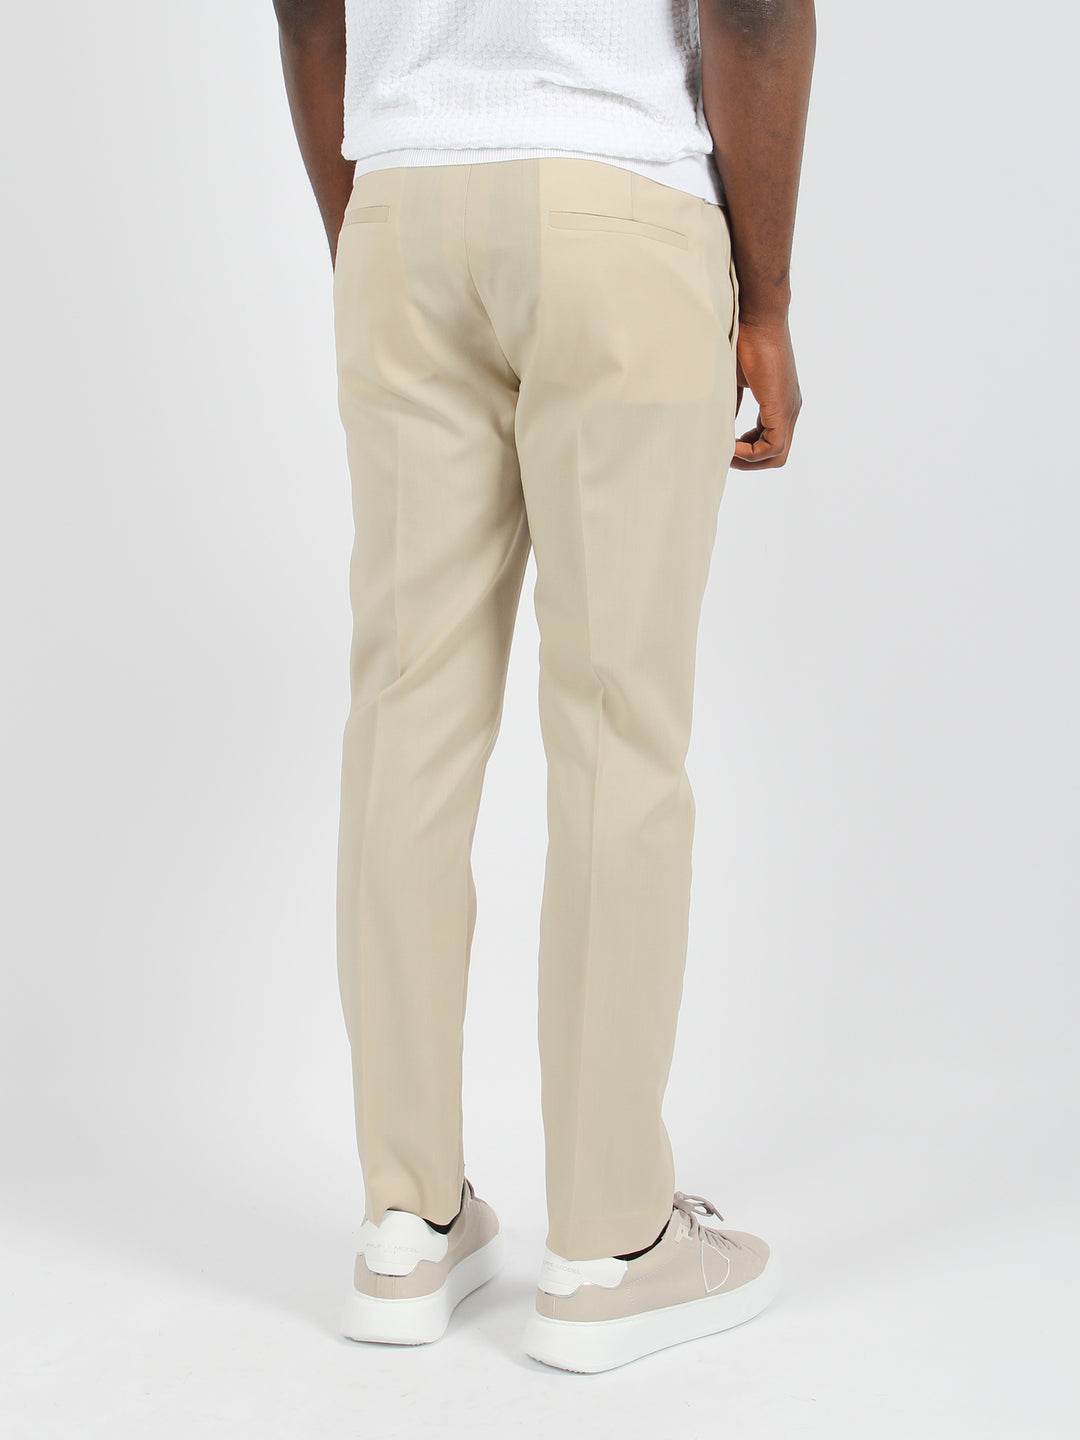 Rivale tropical wool trousers